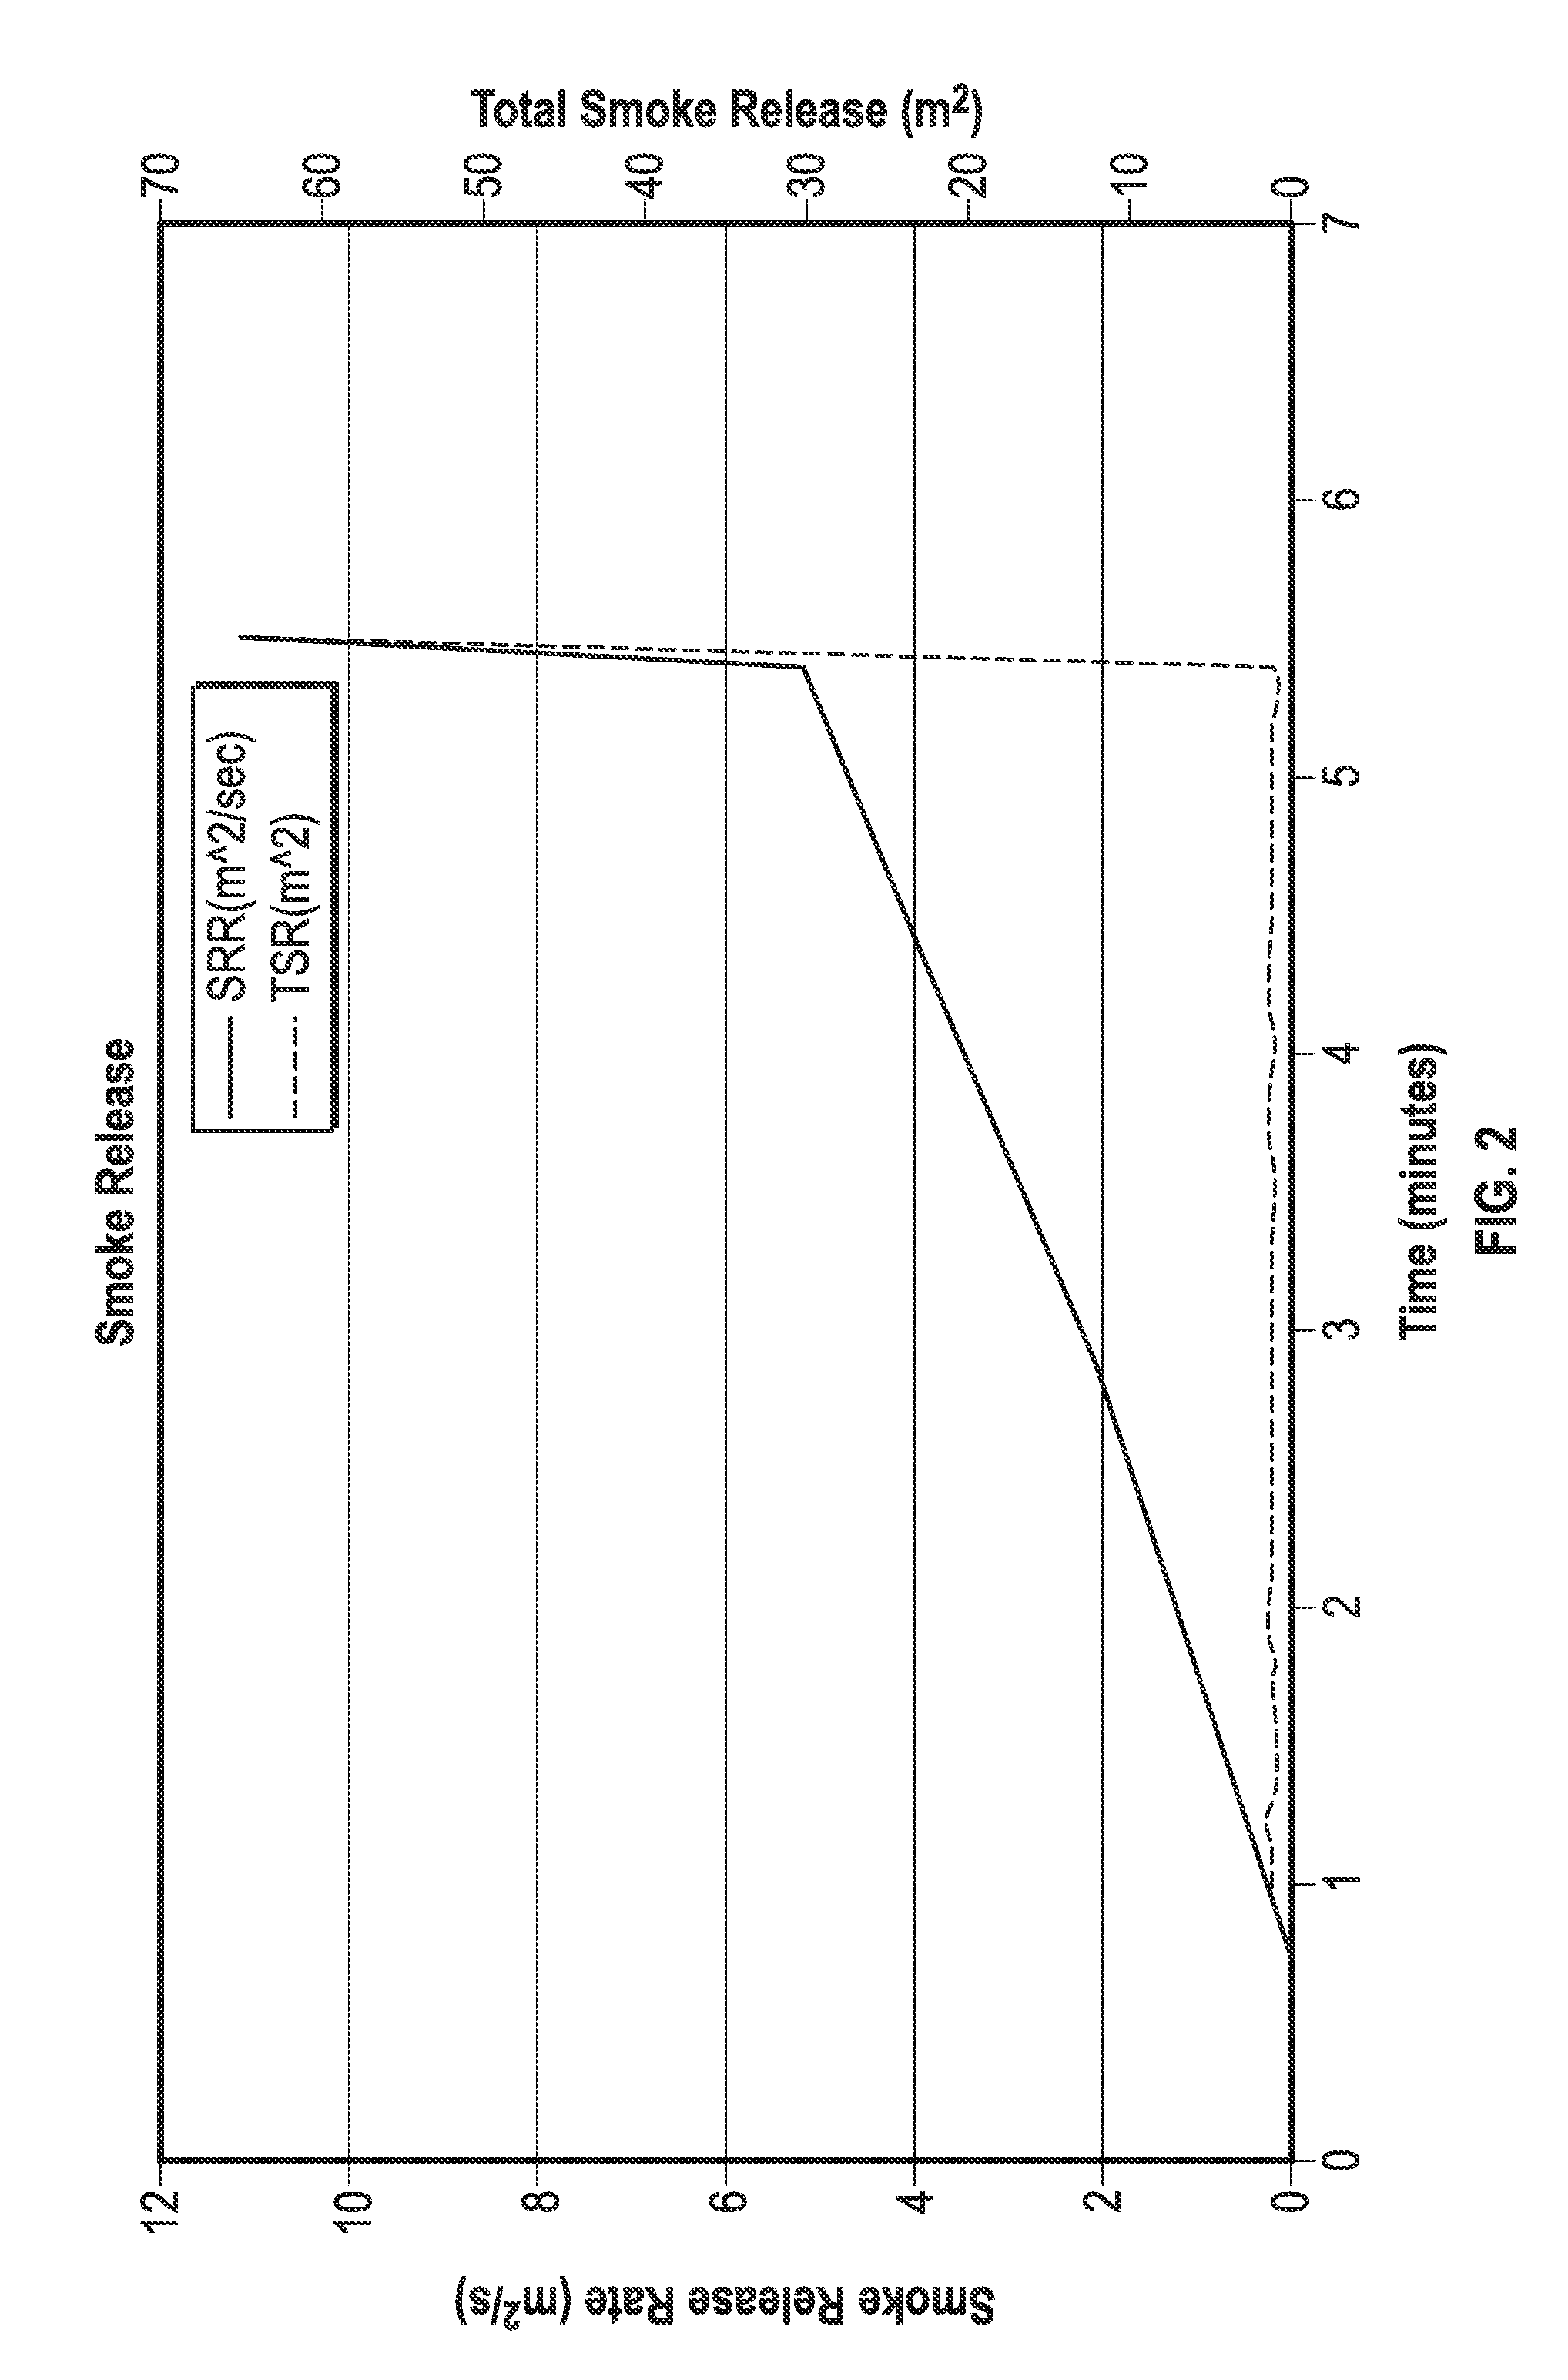 Sugar-Based Polyurethanes, Methods for Their Preparation, and Methods of Use Thereof